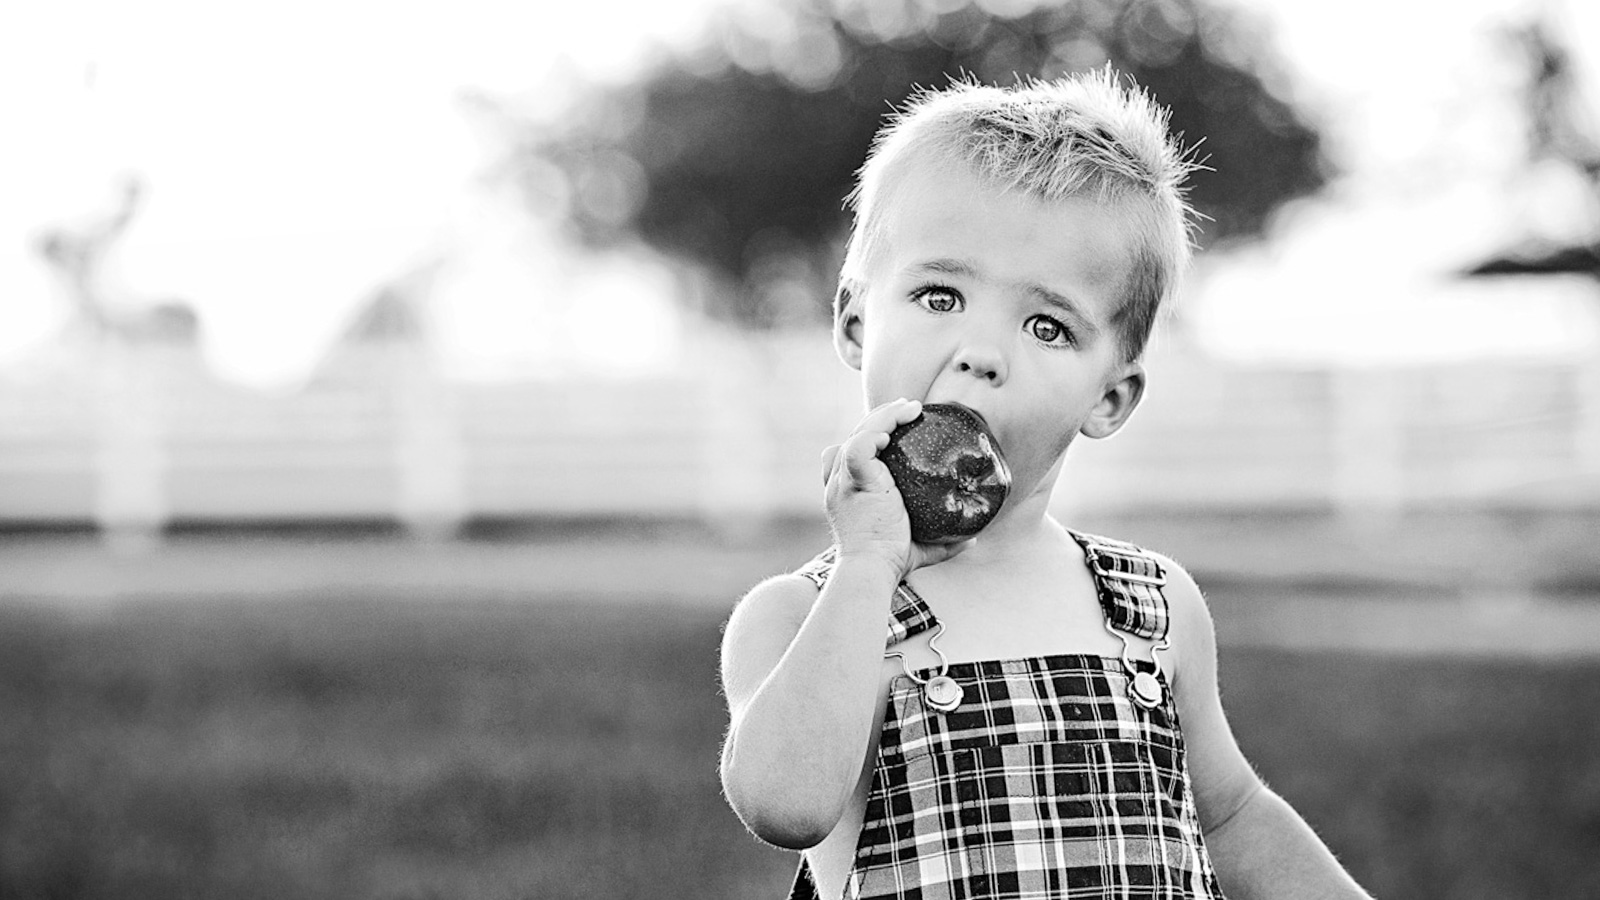 black and white photograph of a young boy eating an apple and wearing overalls.